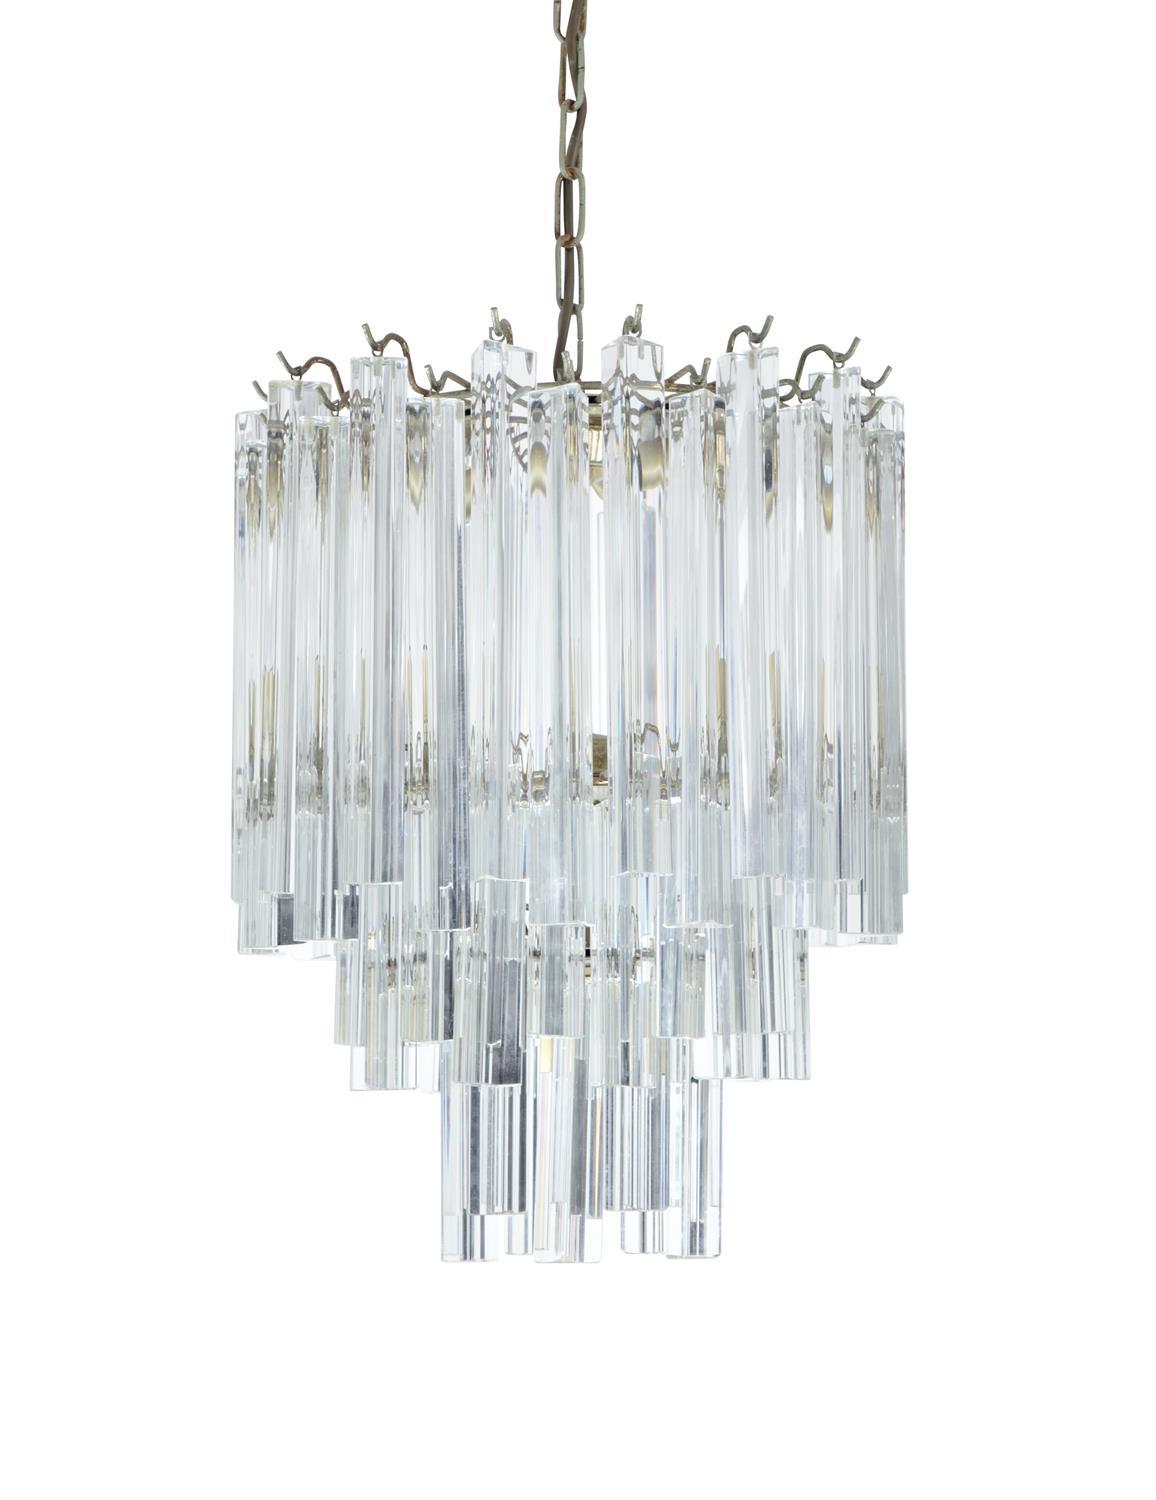 MURANO A pair of Murano chandeliers, with glass drops, Italy c.1950. 53 x 38 x 38cm - Image 2 of 2